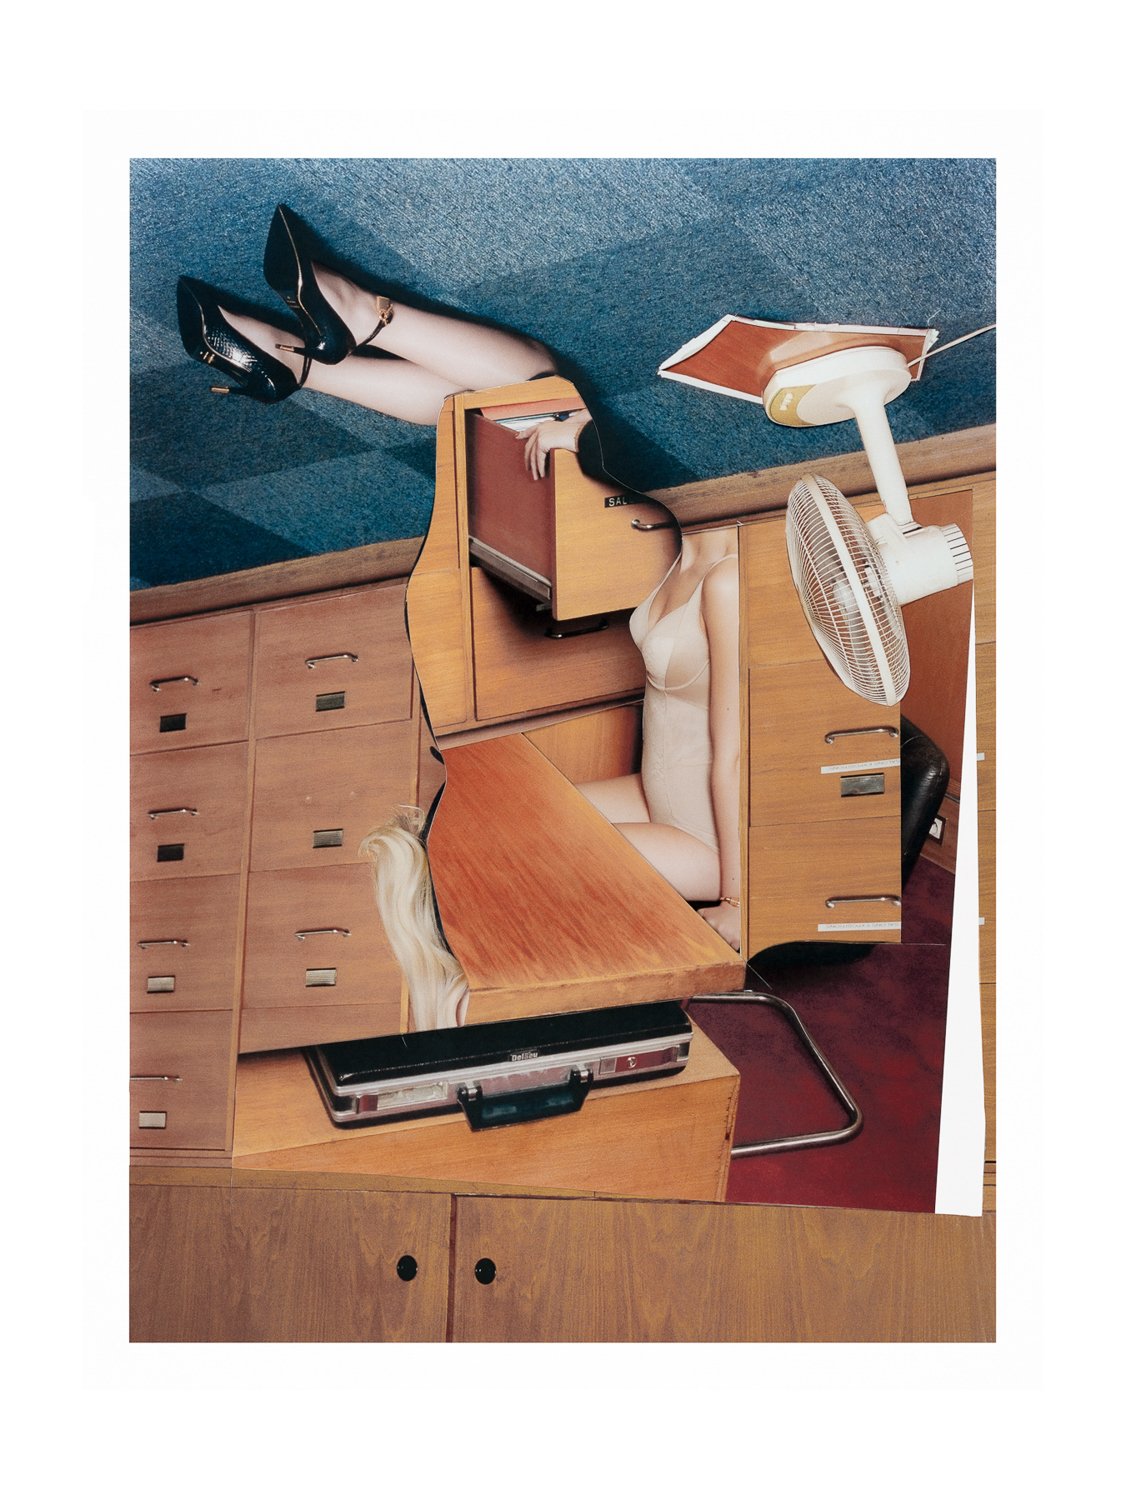 2500 px _The CURVE_Filing Cabinet, 2019_51 x 68cm_K YOUNG ©-2.jpg